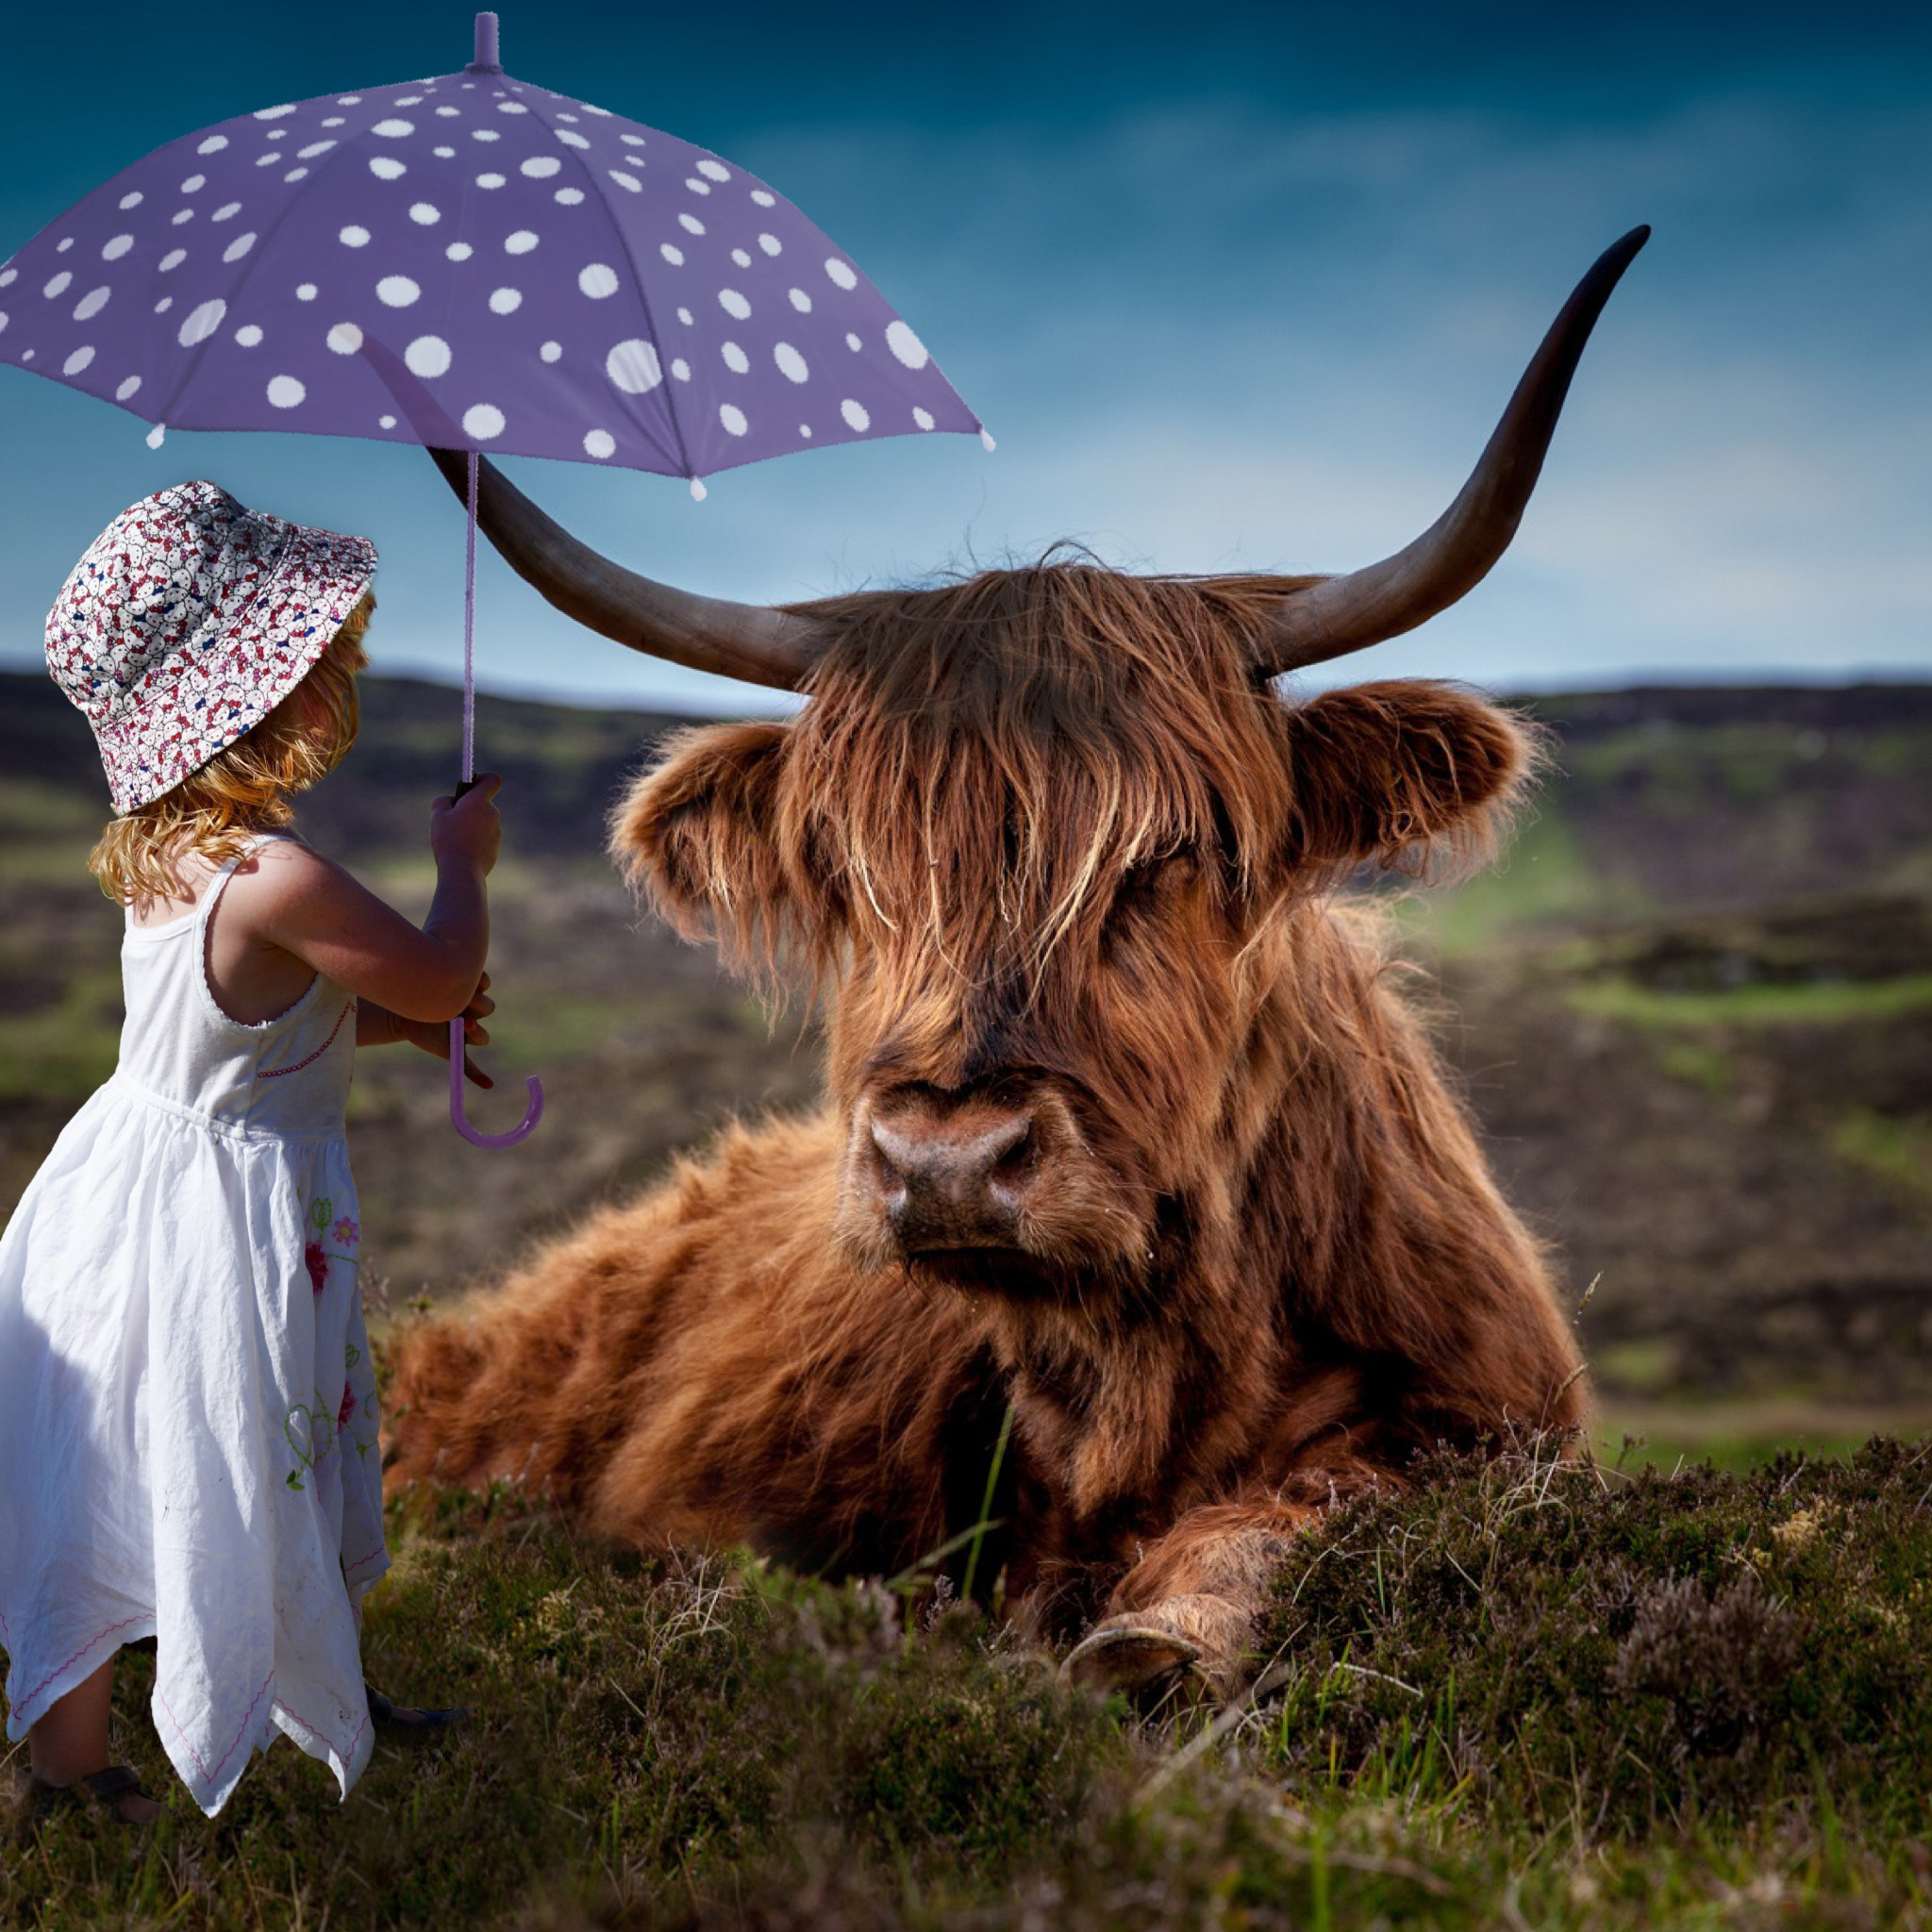 Child with the umbrella and the funny cow wallpaper 2048x2048